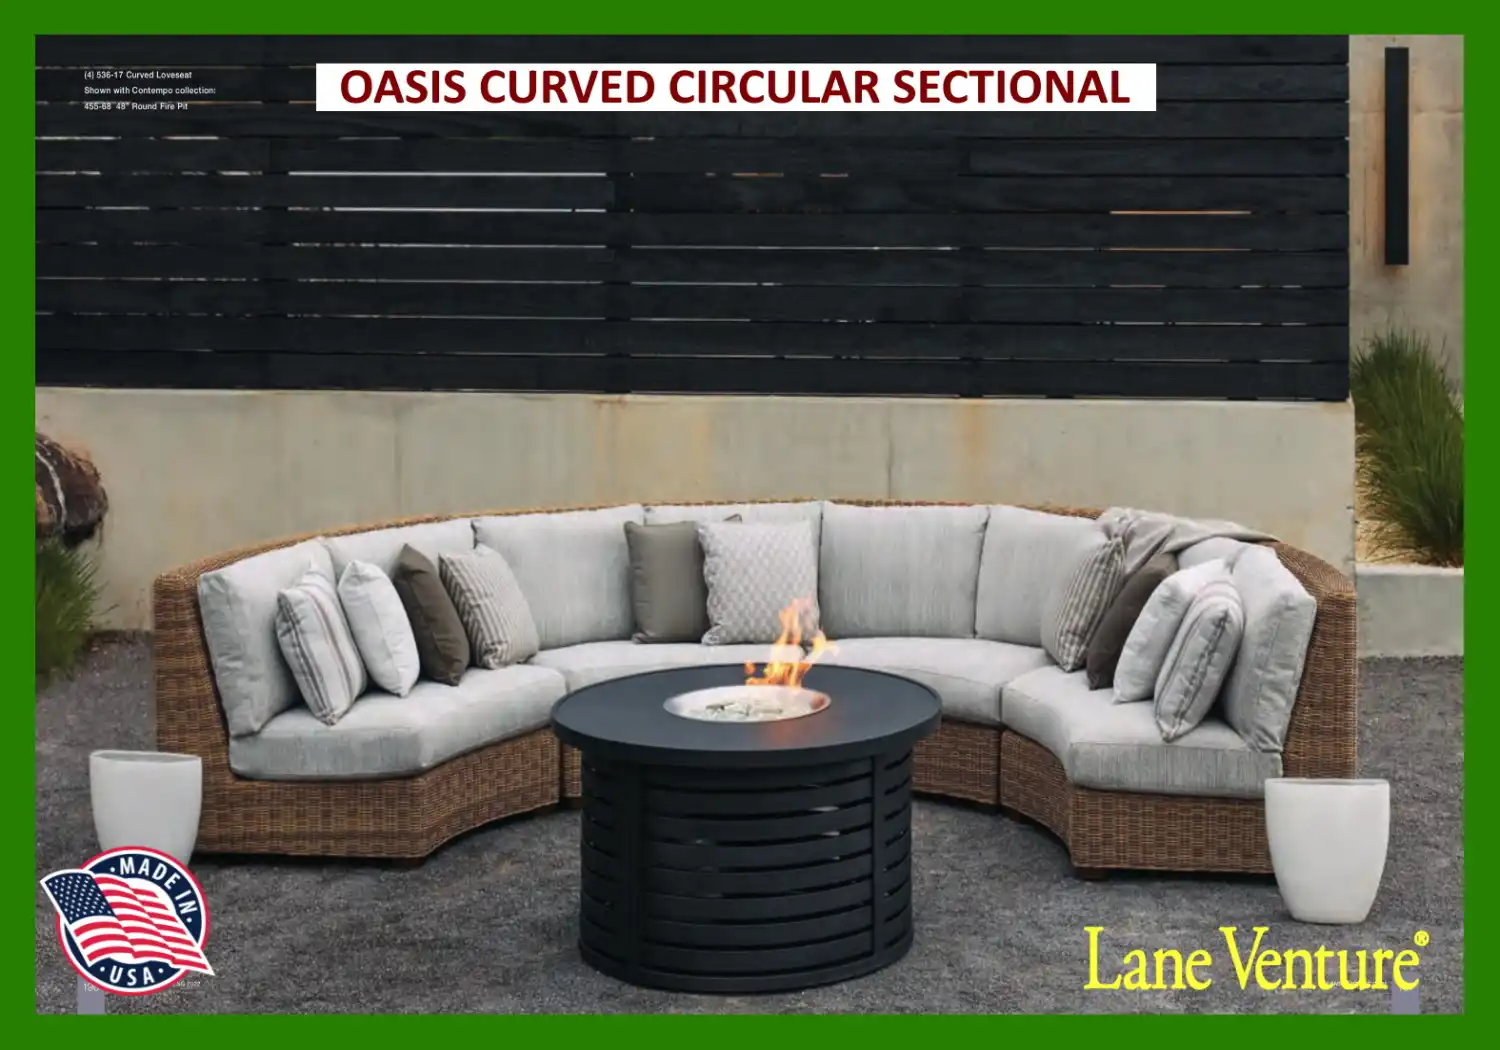 OASIS CURVED CIRCULAR SECTIONAL